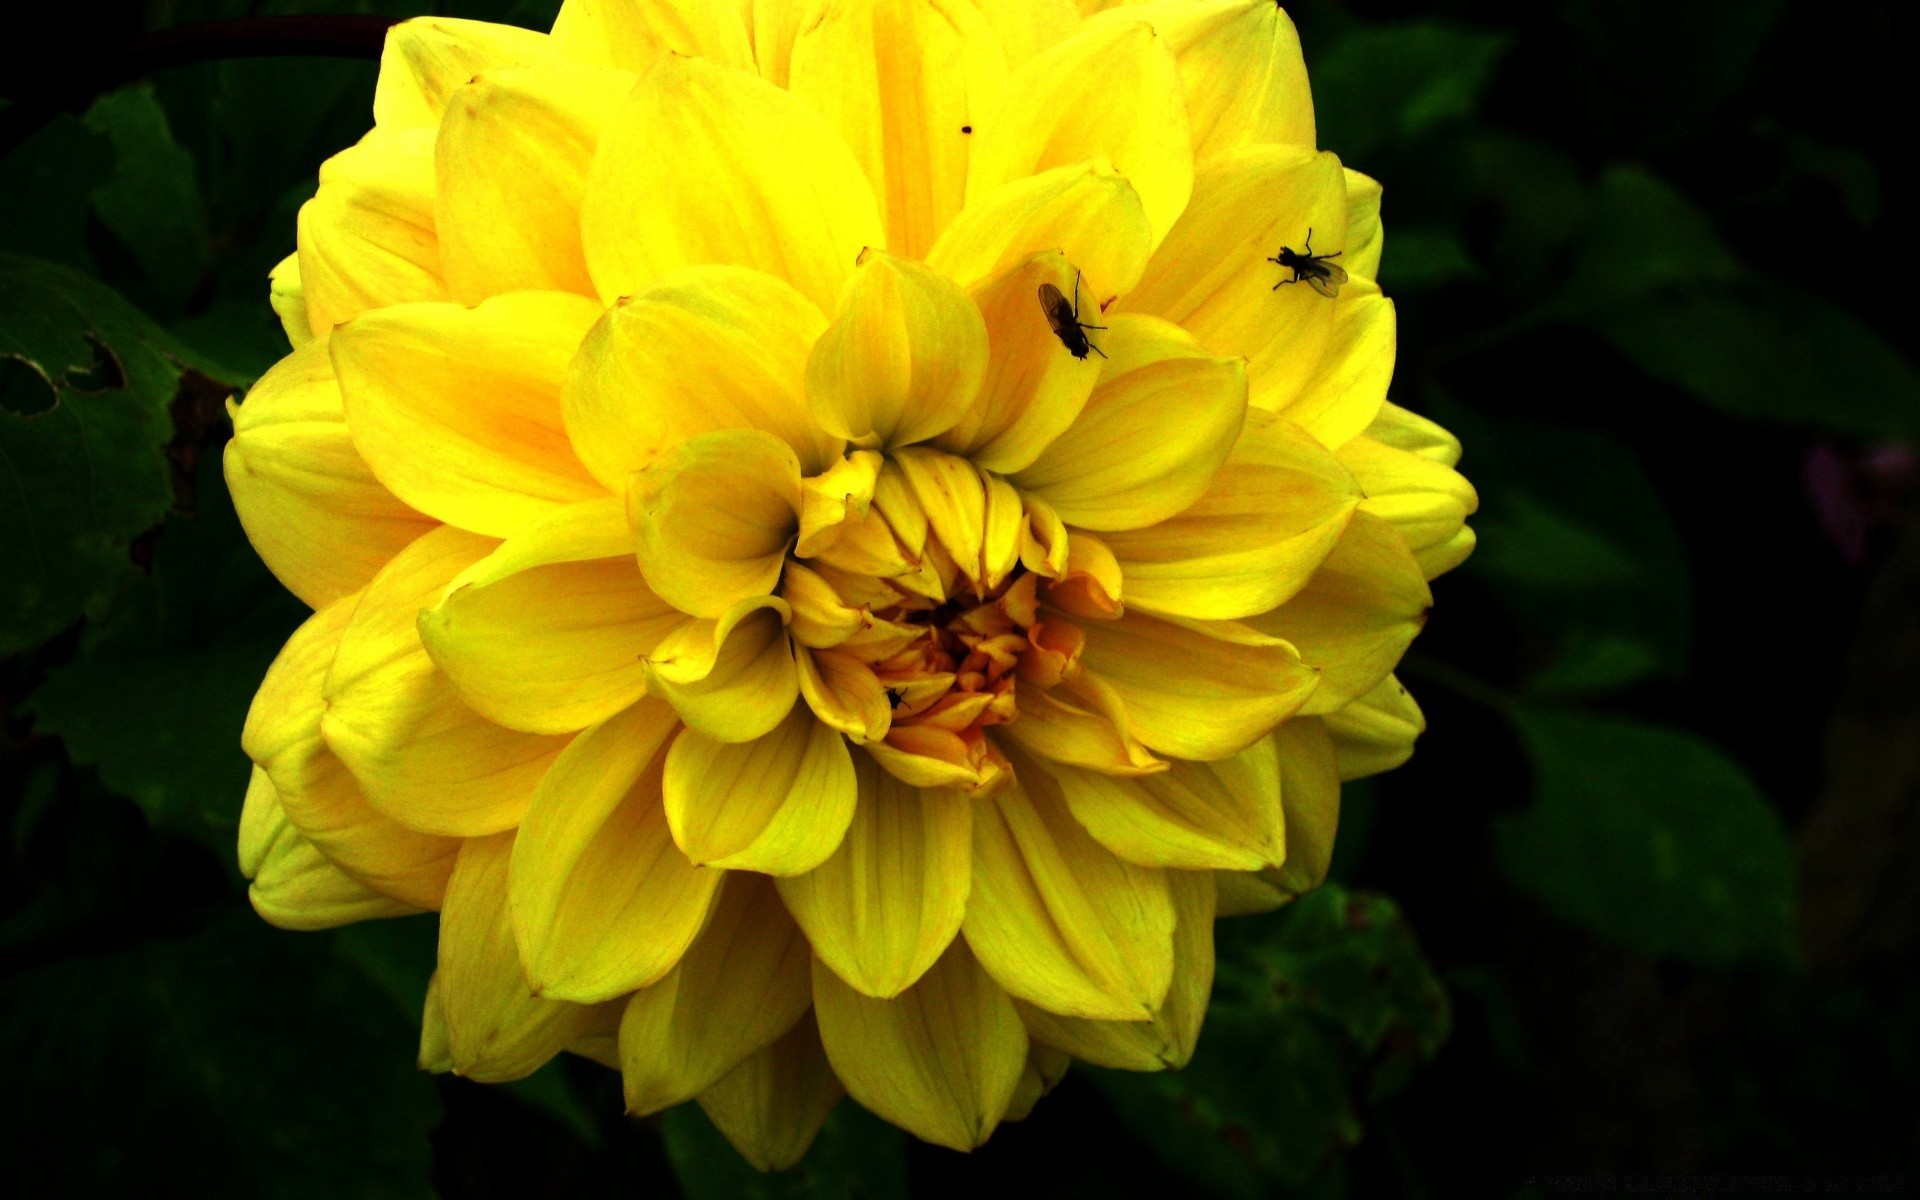 flowers flower nature flora summer leaf garden color petal dahlia blooming floral bright growth beautiful close-up season